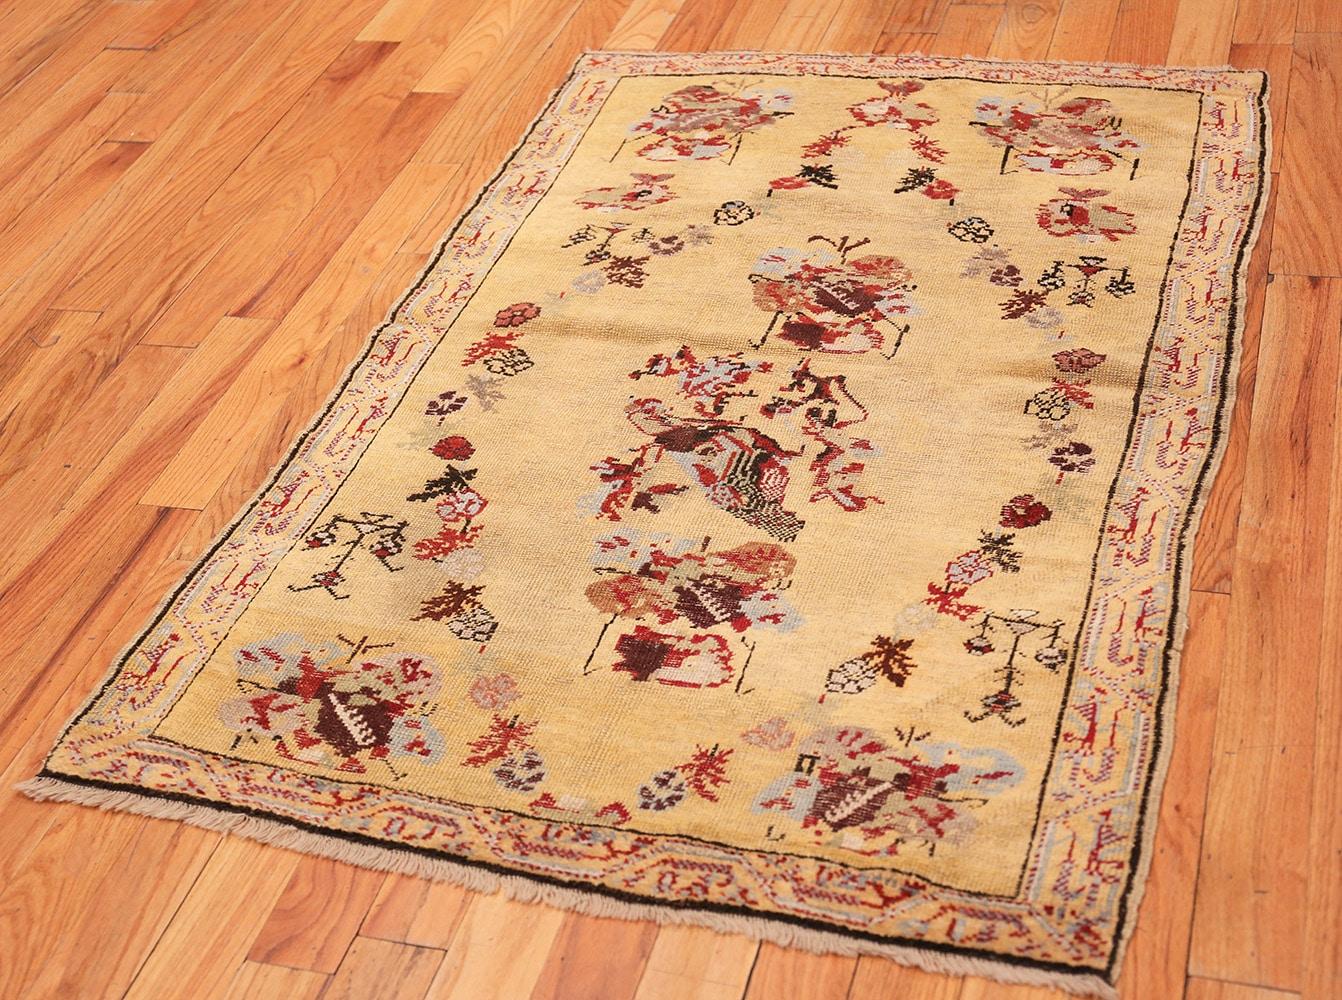 Small scatter size antique Turkish Ghiordes rug, country of origin: Turkey, date circa 1900. Size: 3 ft. 4 in x 5 ft. (1.02 m x 1.52 m)

This antique Oriental rug, is a happy and charming Turkish Ghiordes rug. This small size scatter rug is